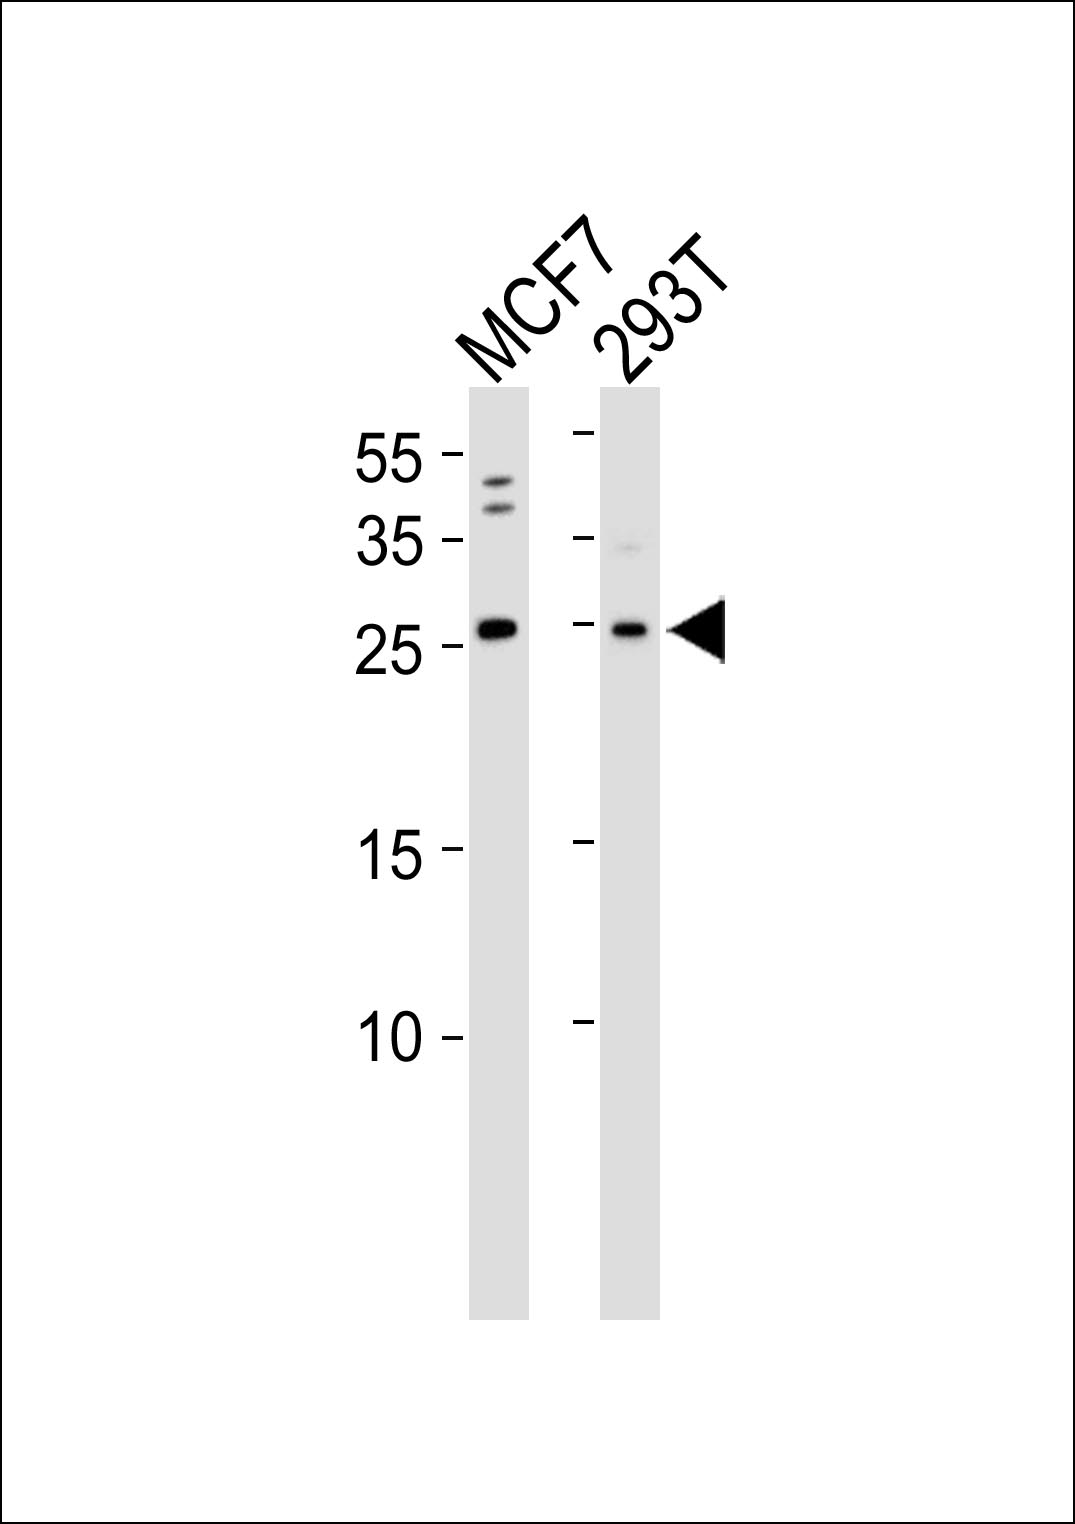 ARF6 Antibody (OAAB18543) in MCF7, 293T cell line (from left to right) using Western Blot